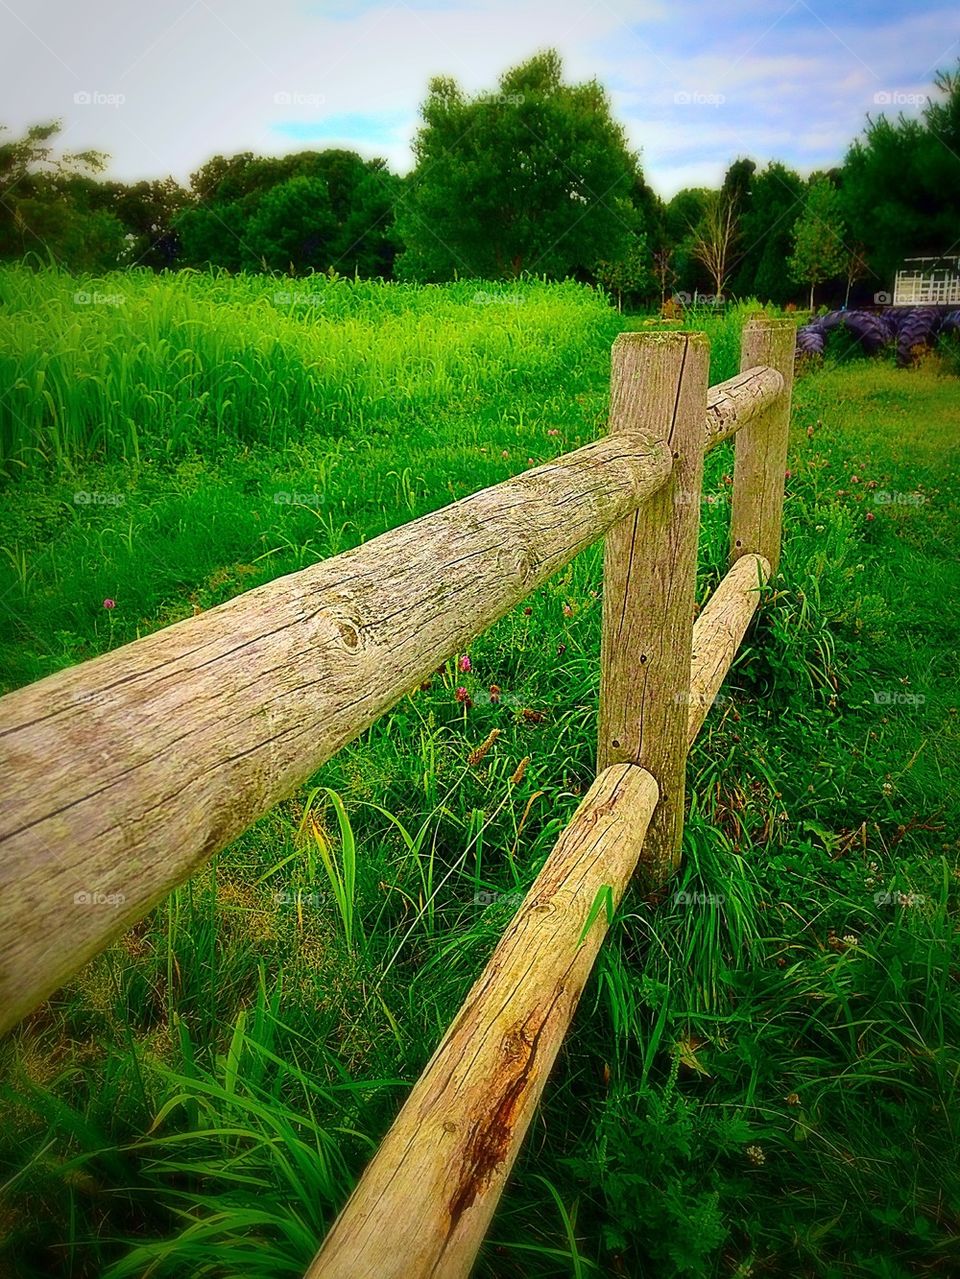 Don't fence me in...